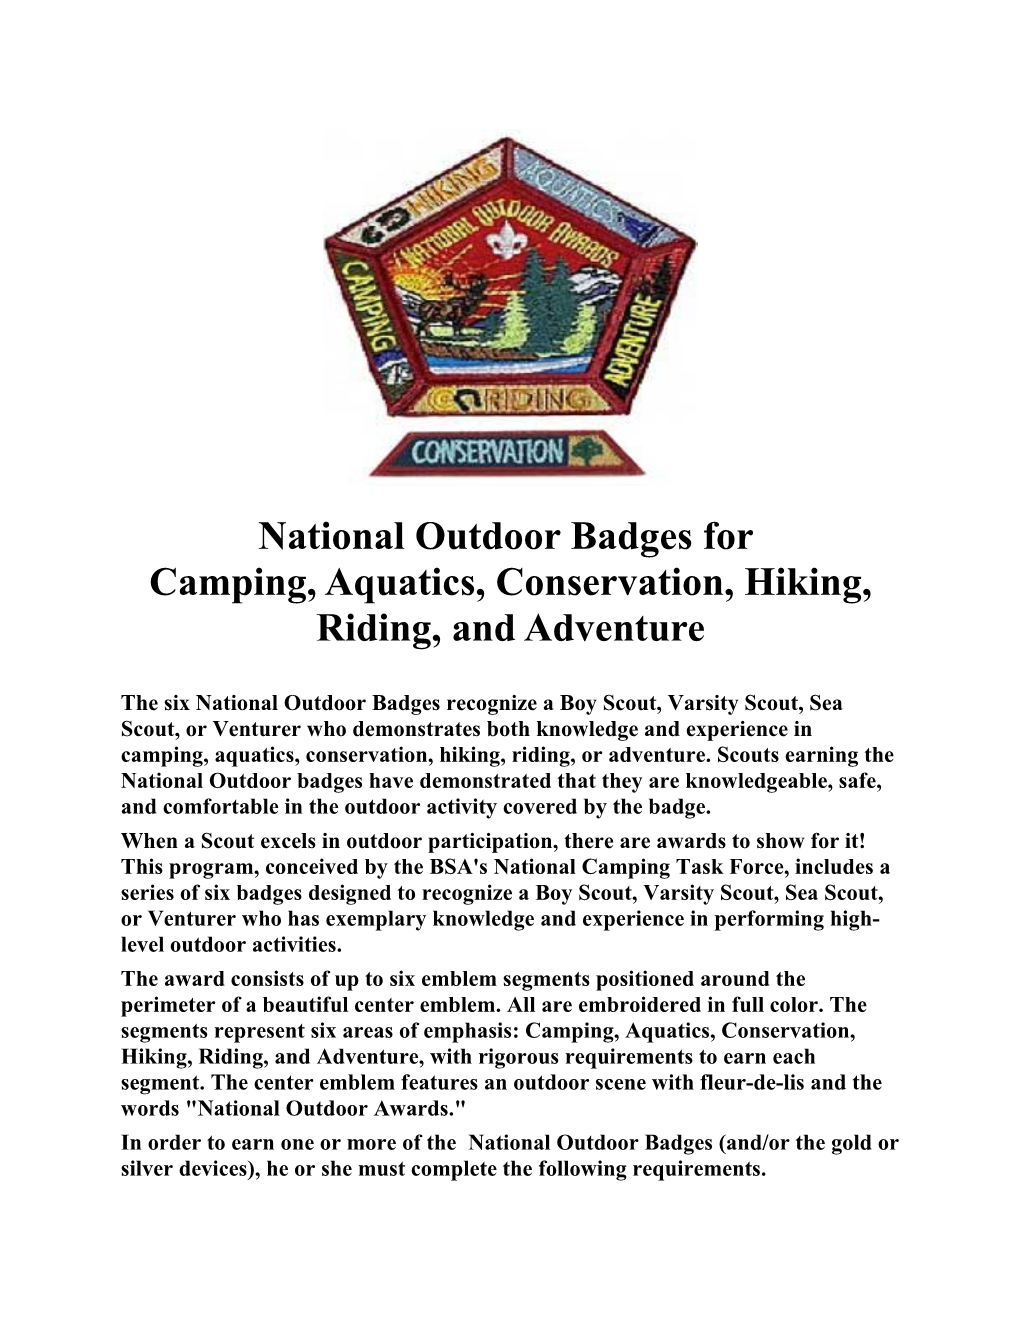 National Outdoor Badges for Camping, Aquatics, Conservation, Hiking, Riding, and Adventure